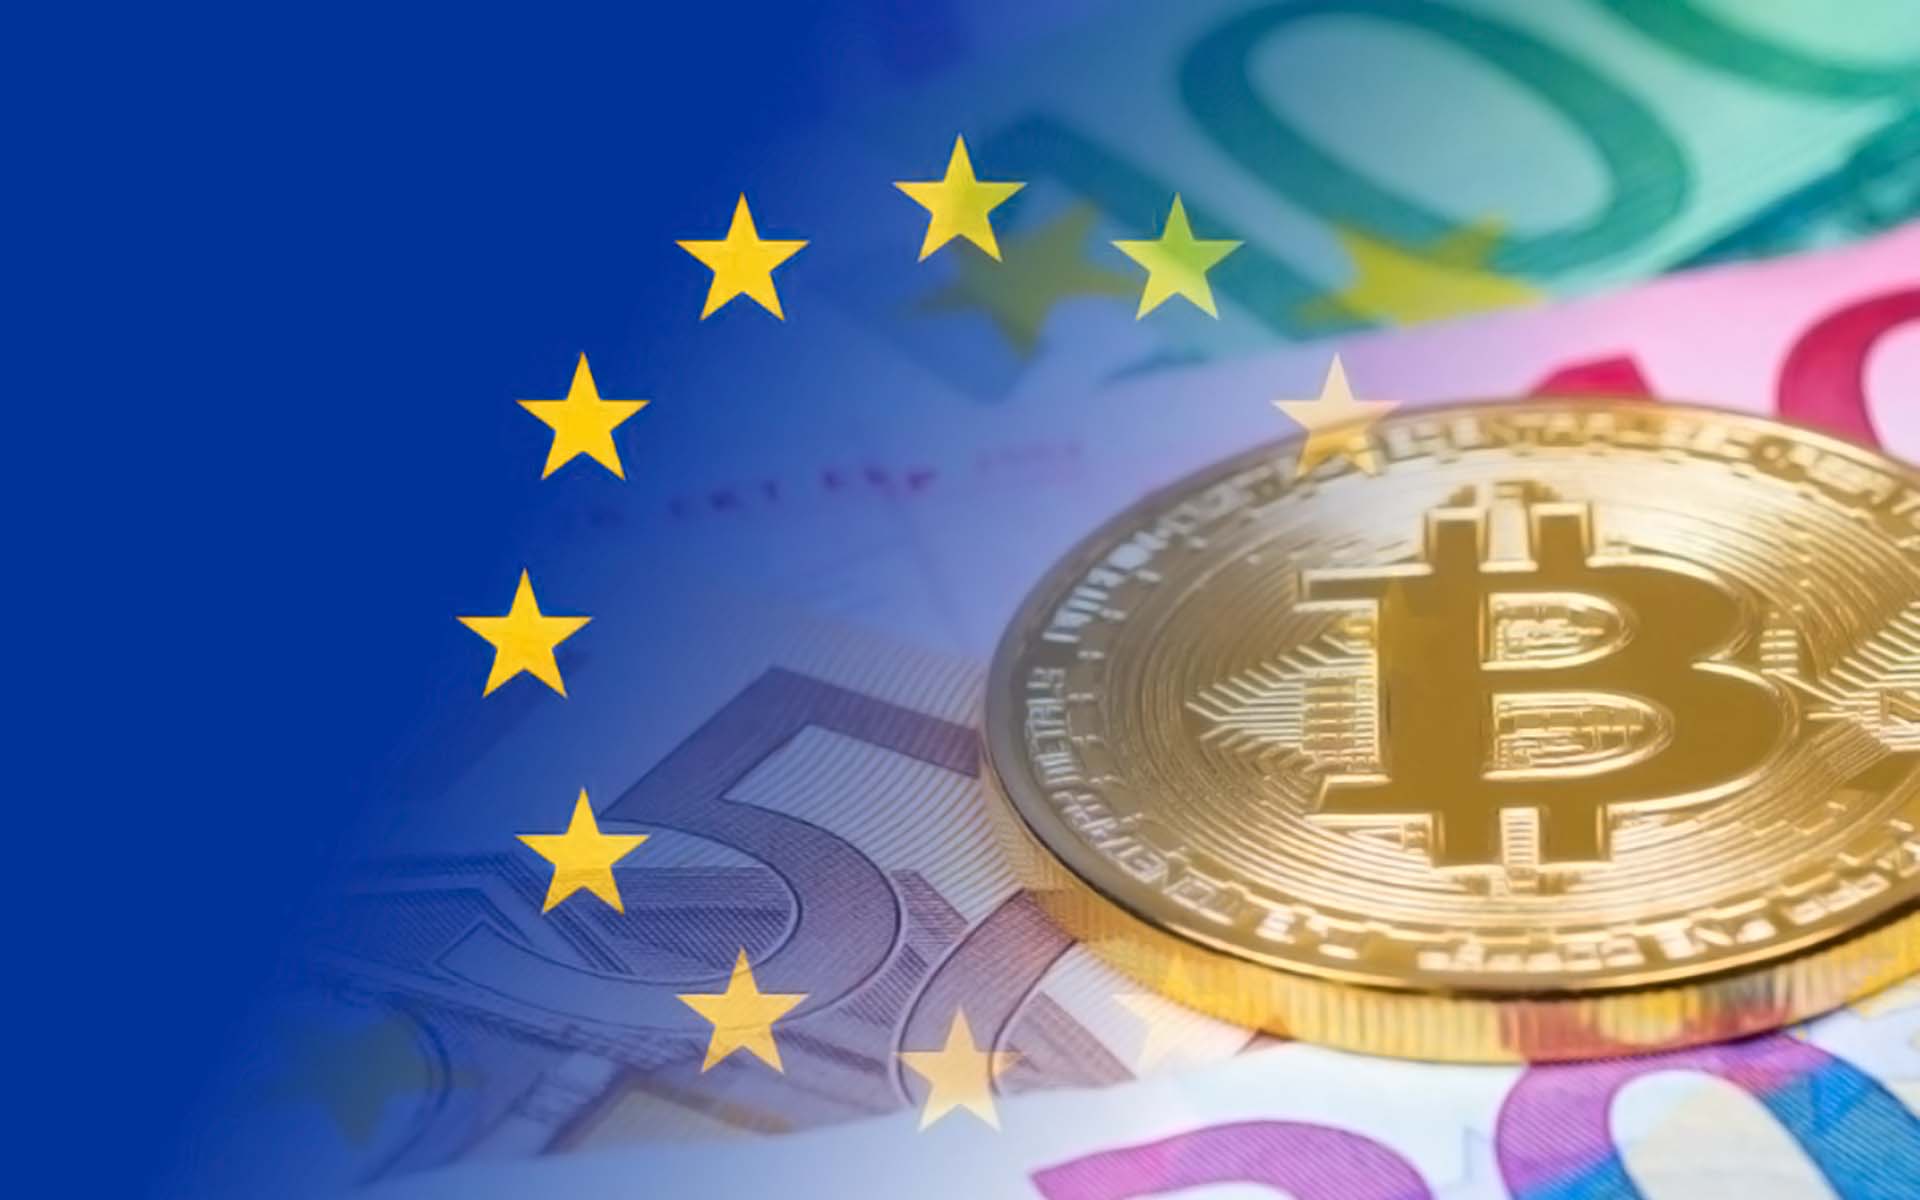 Europe Still Isn’t Ready to Regulate Cryptocurrencies